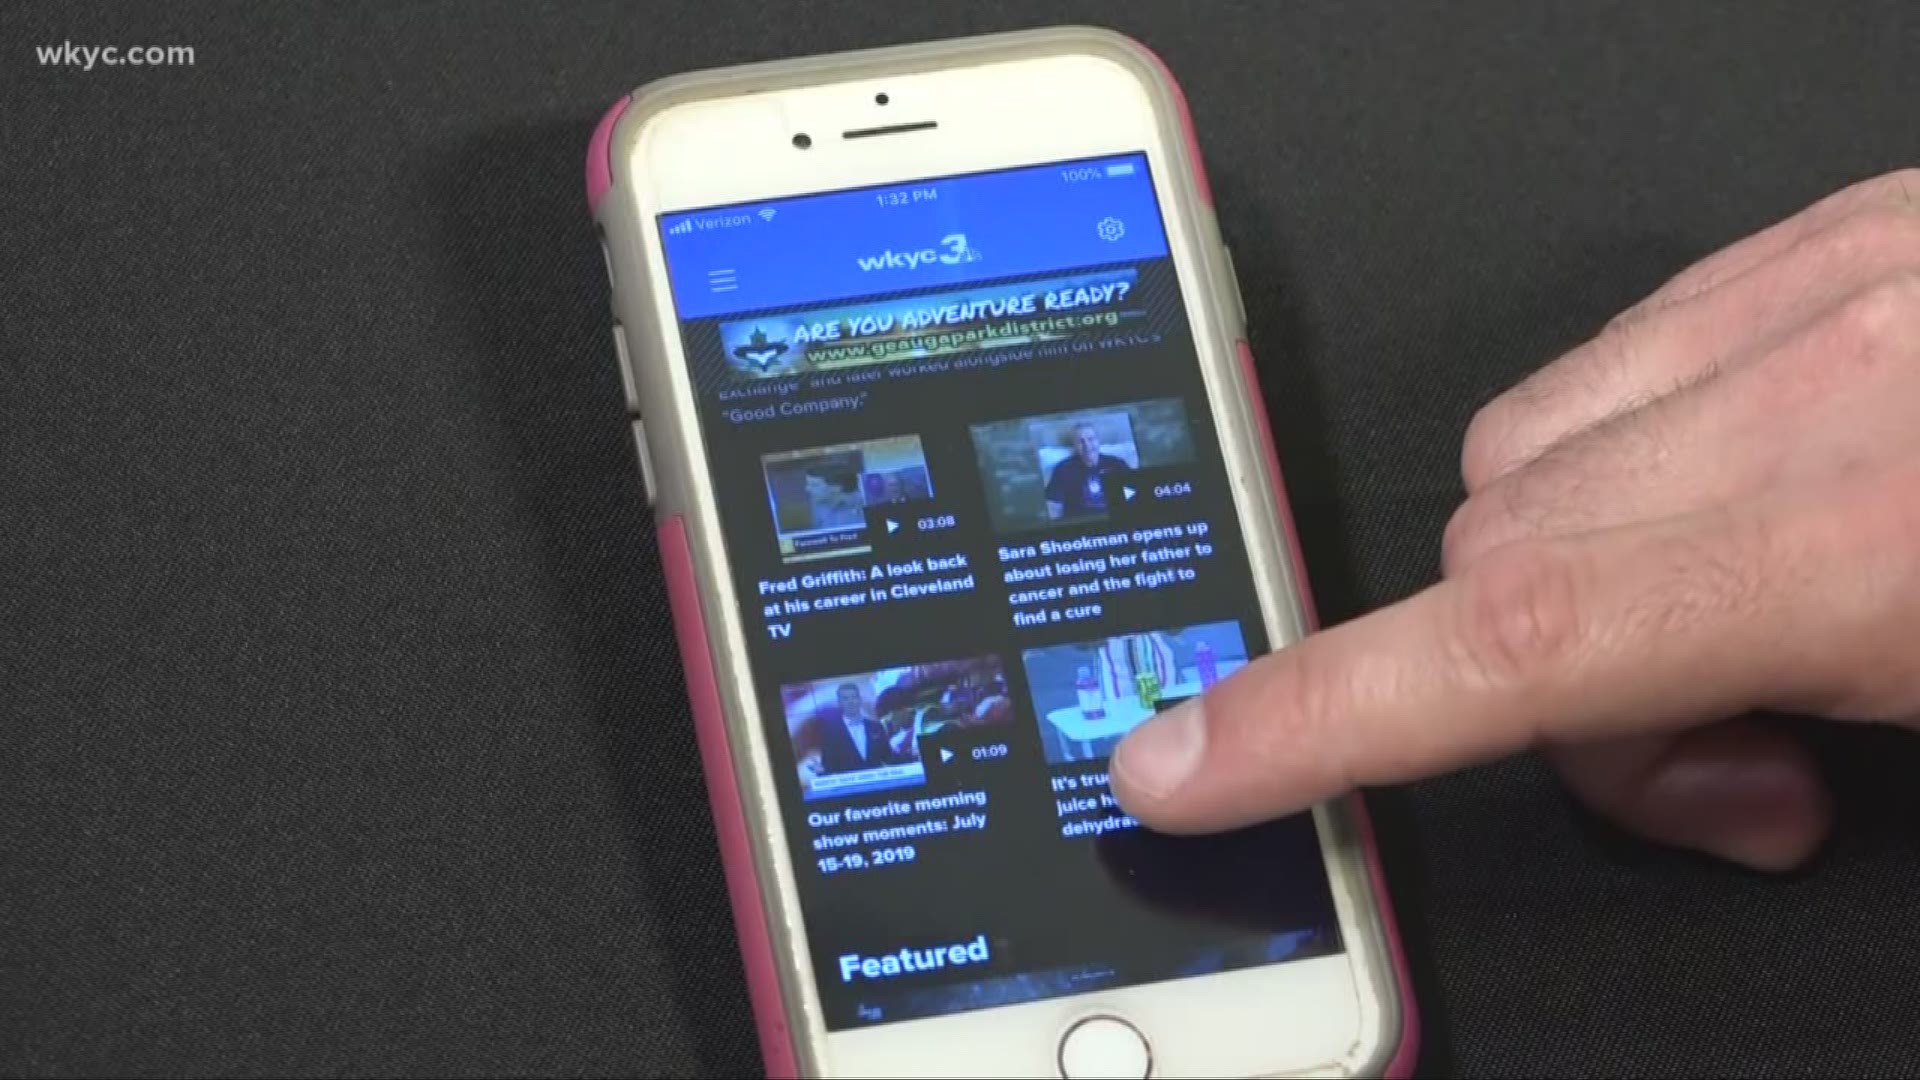 WKYC's new mobile app launches Monday, July 22. Here's to use it.